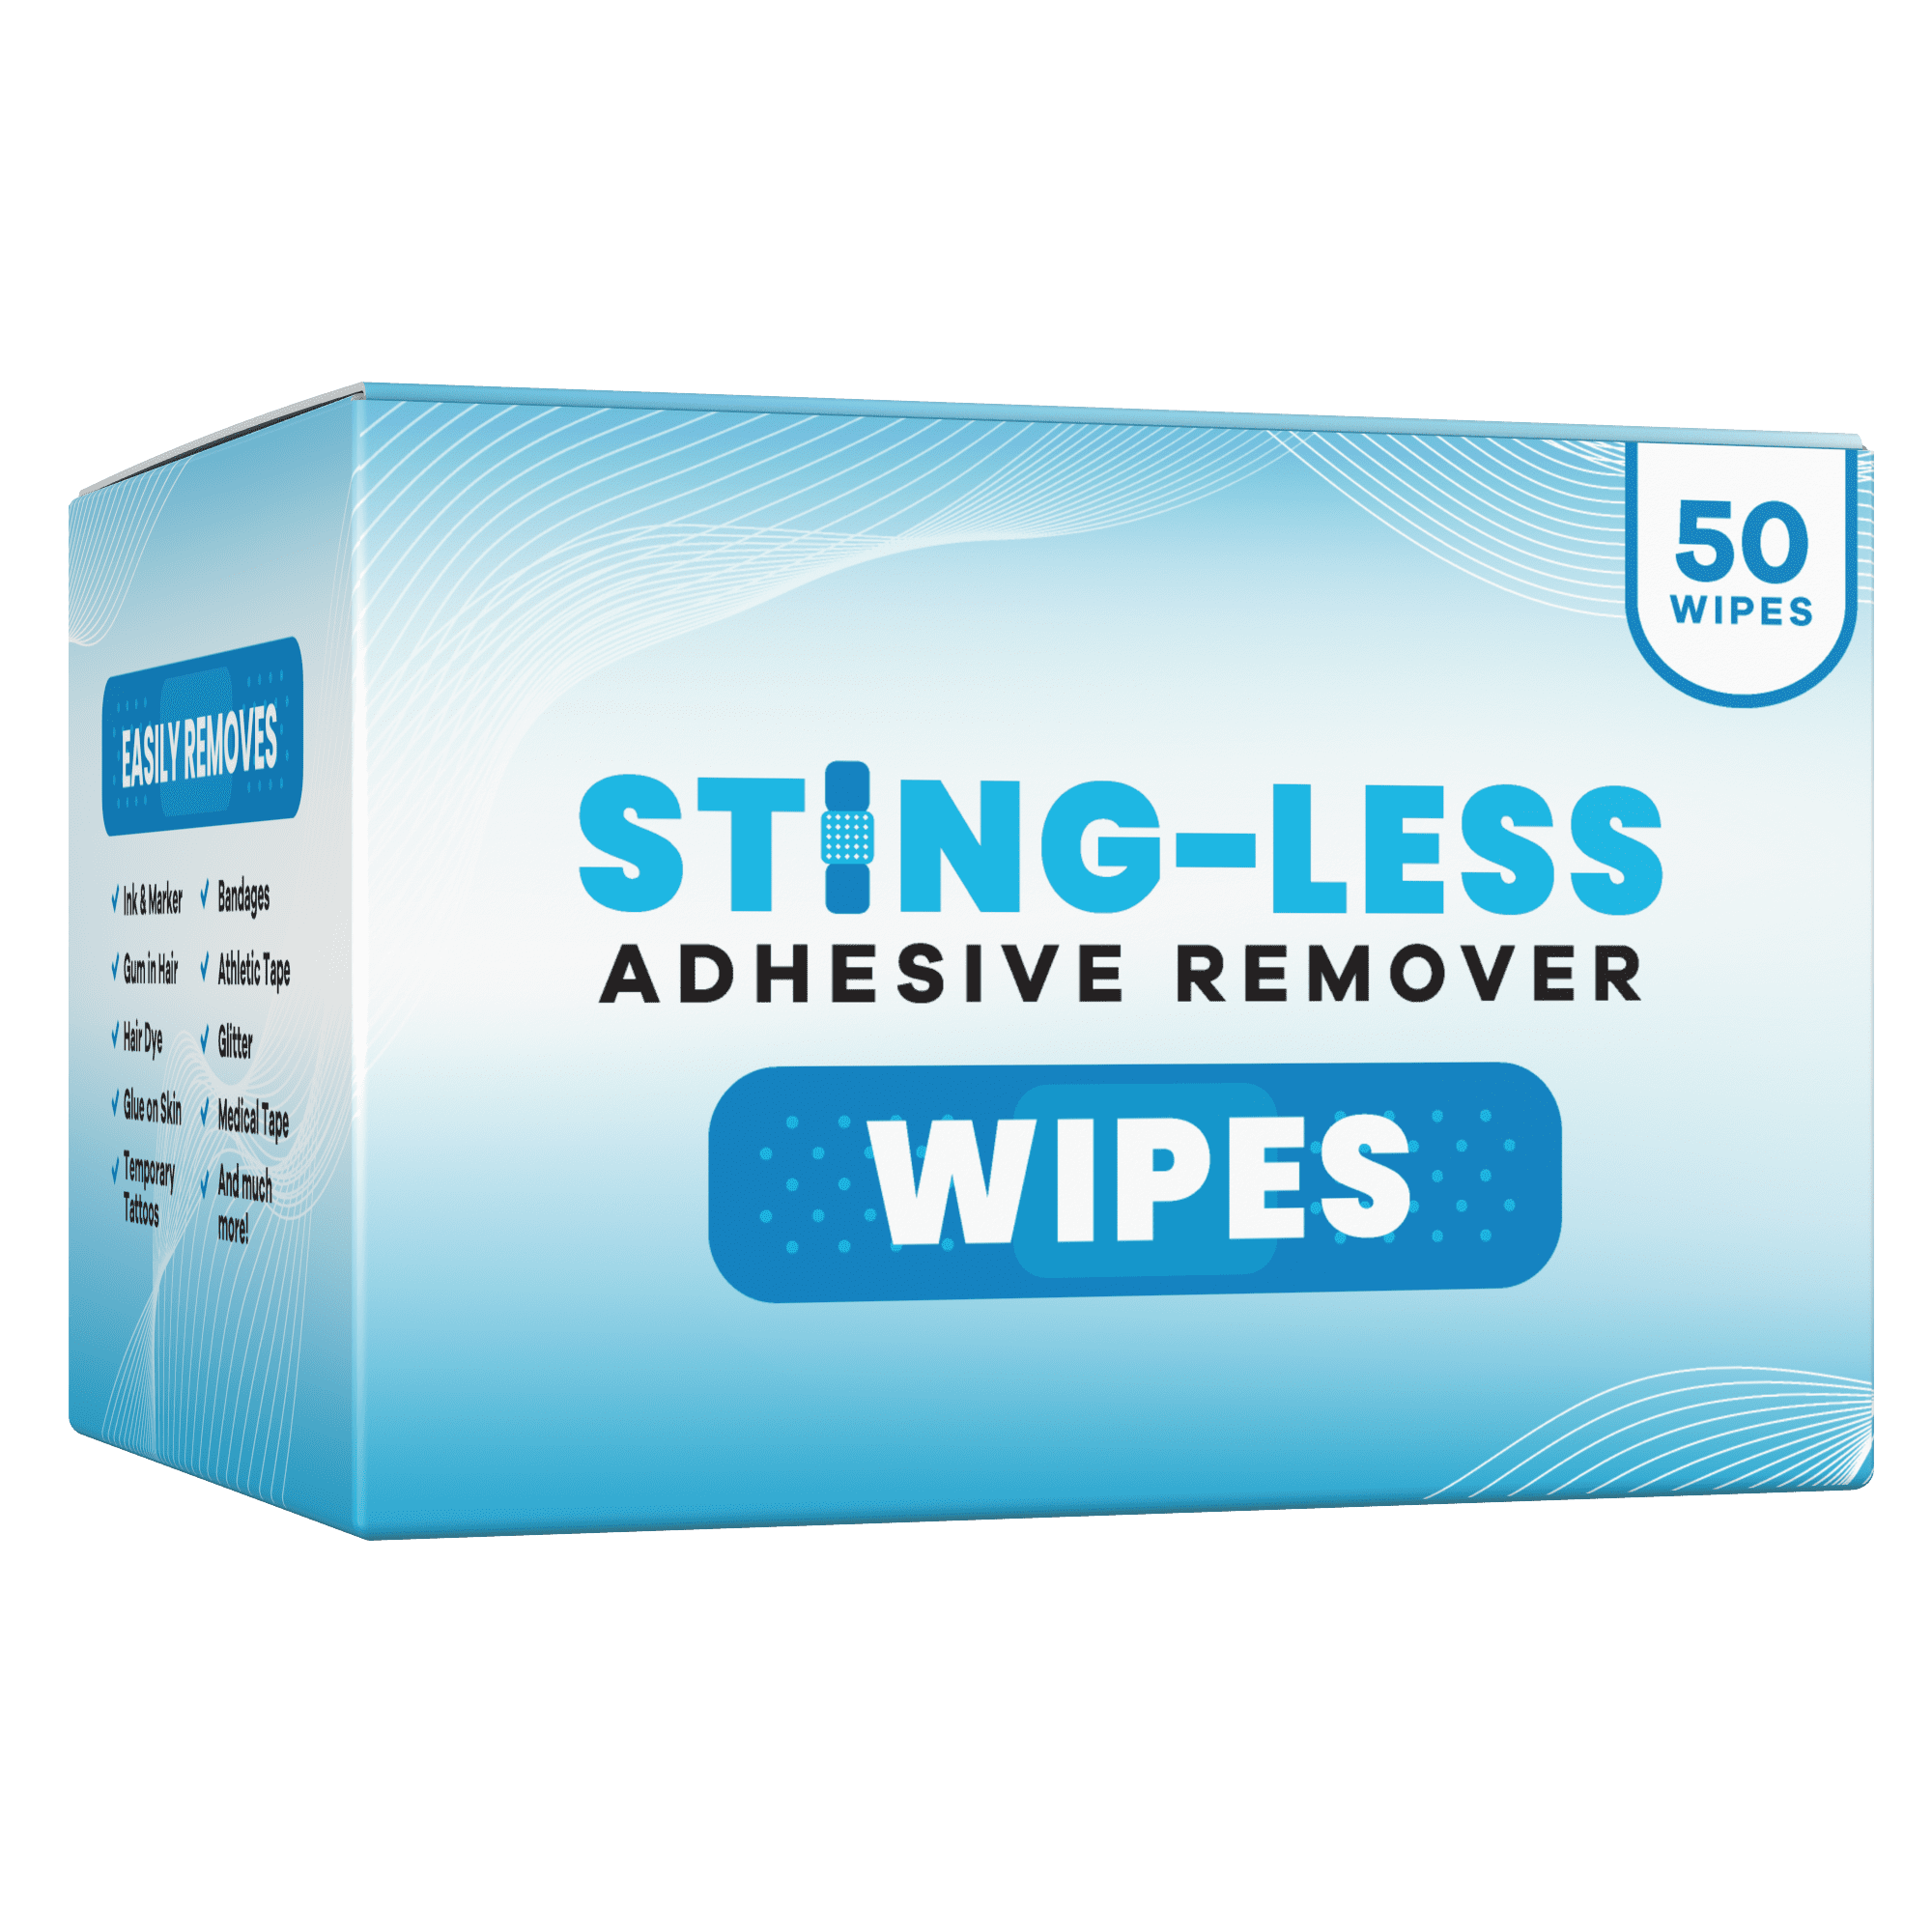 Adhesive Remover Wipes for Skin - Stingless Adhesive Remover